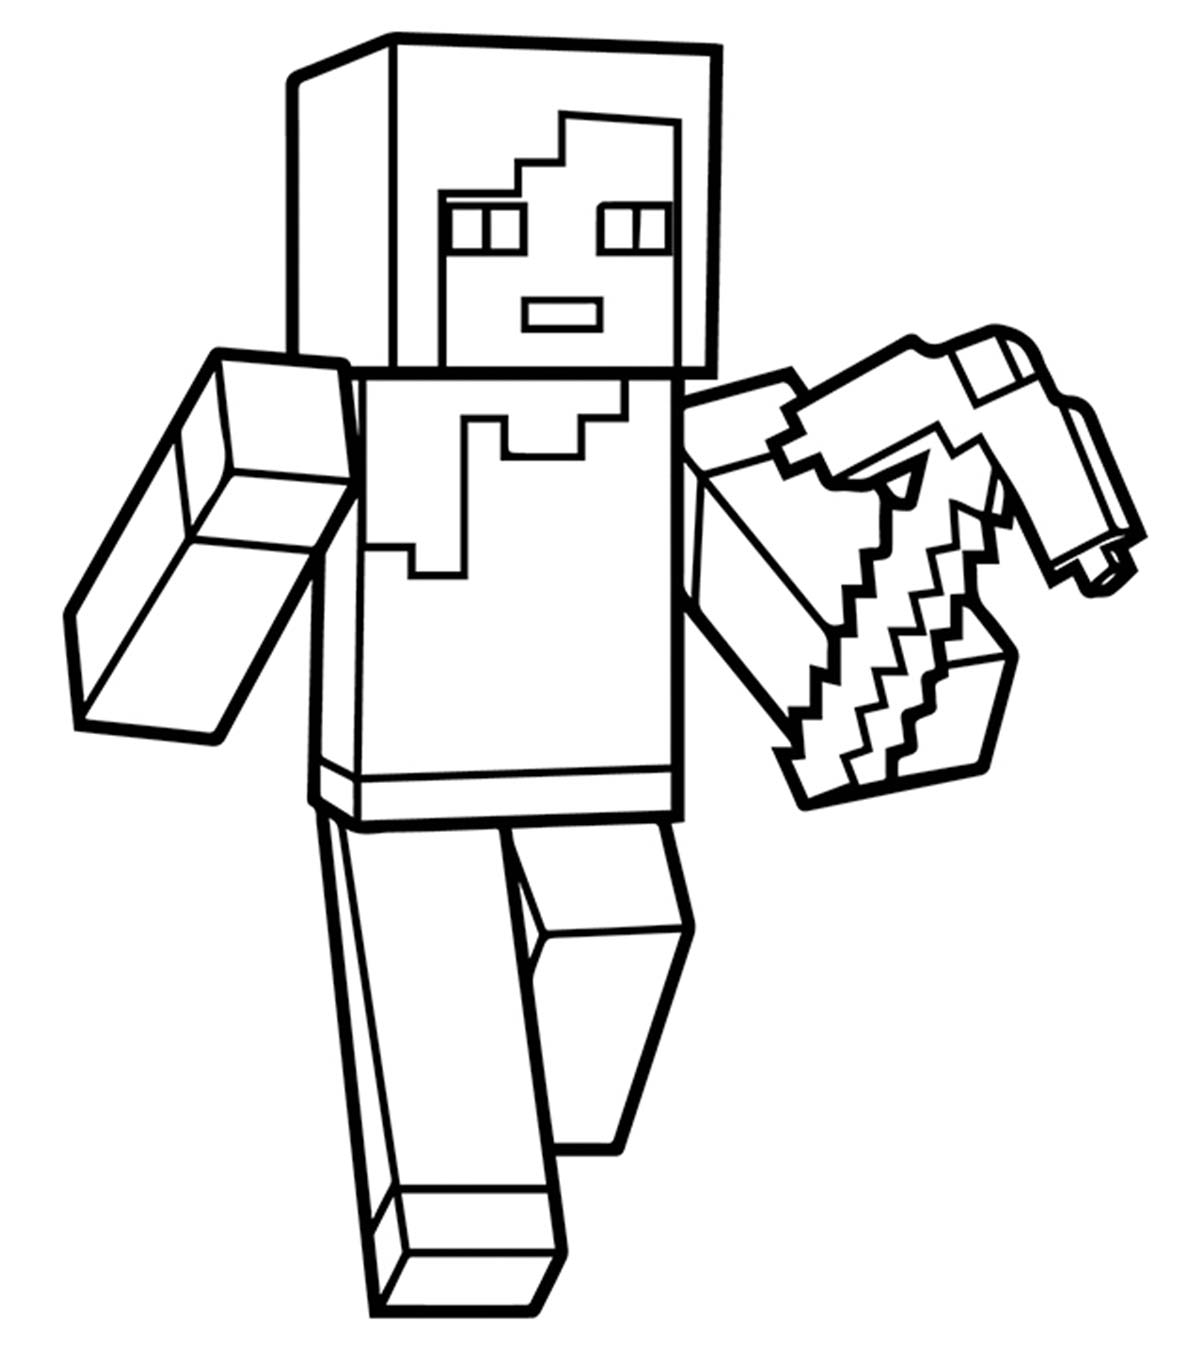 37 Awesome Printable Minecraft Coloring Pages For Toddlers_image